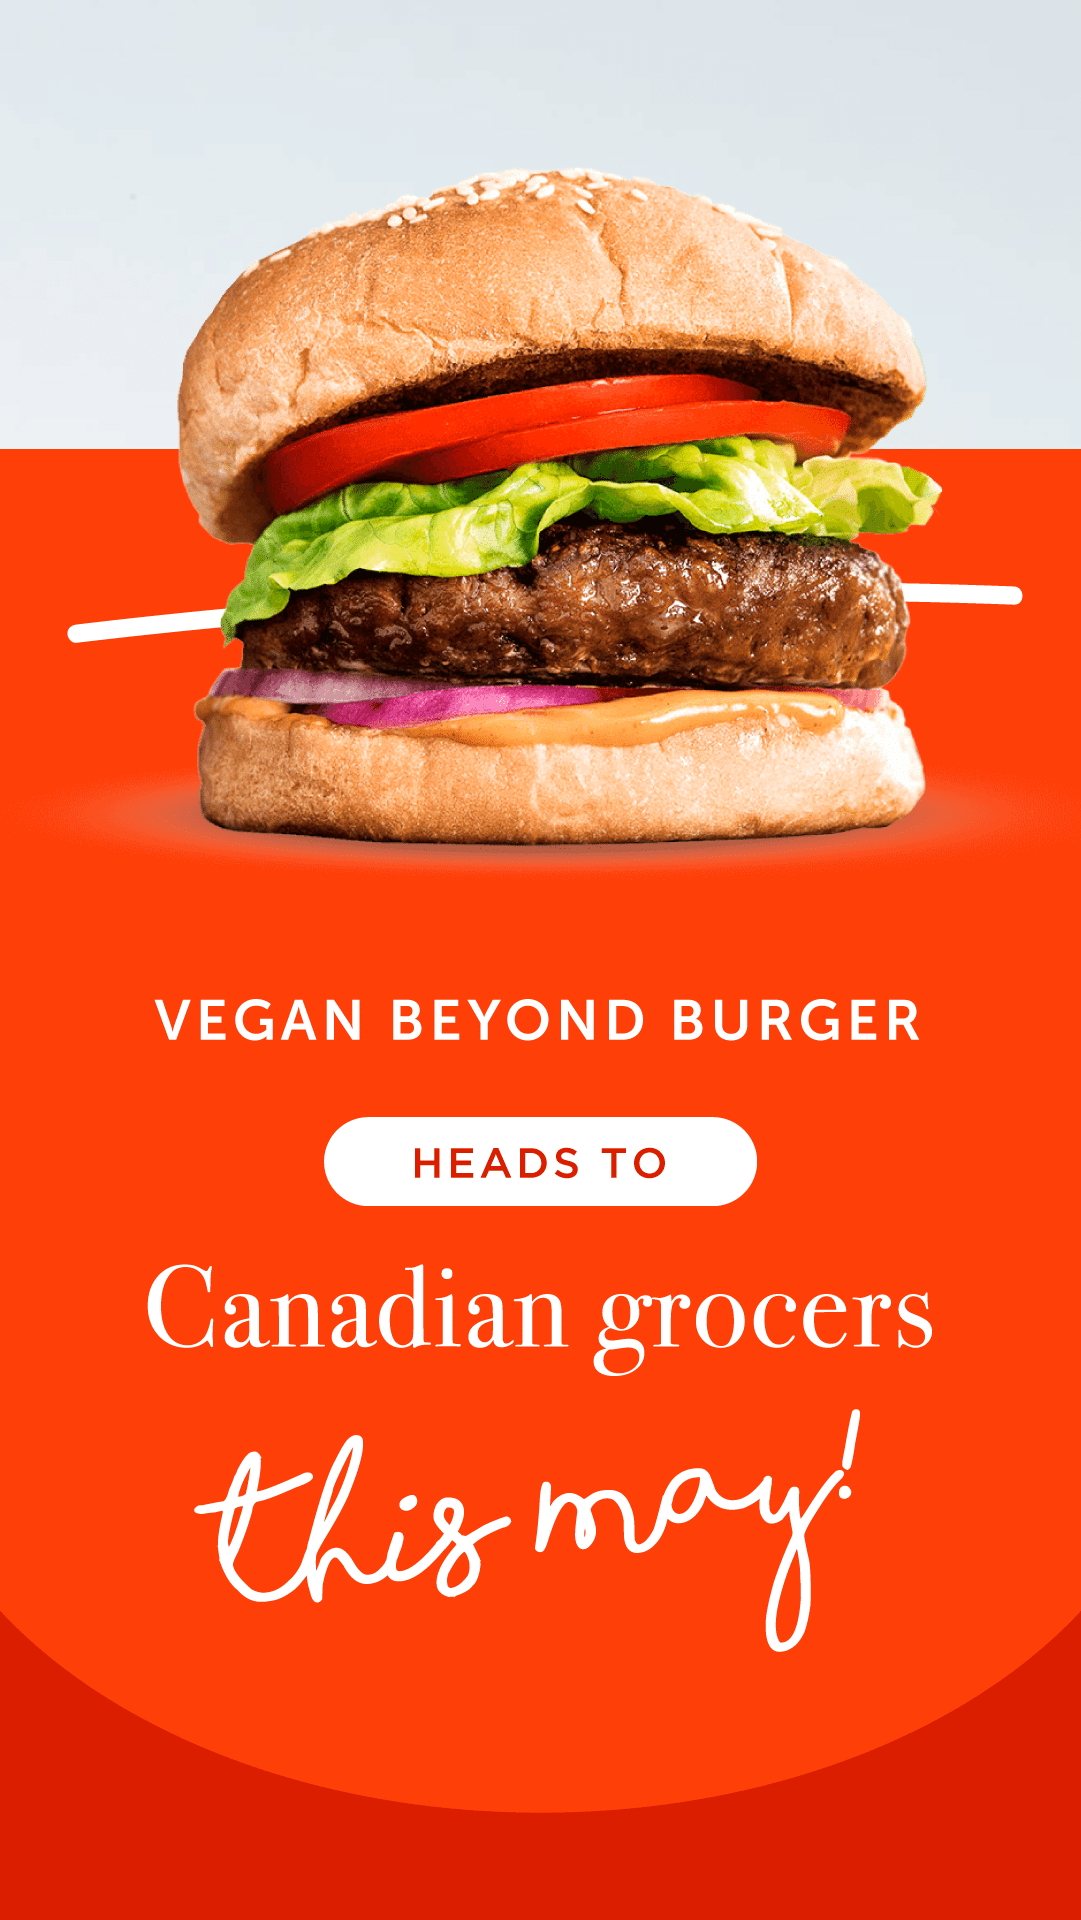 Vegan Beyond Burger Heads to Canadian Grocers This May